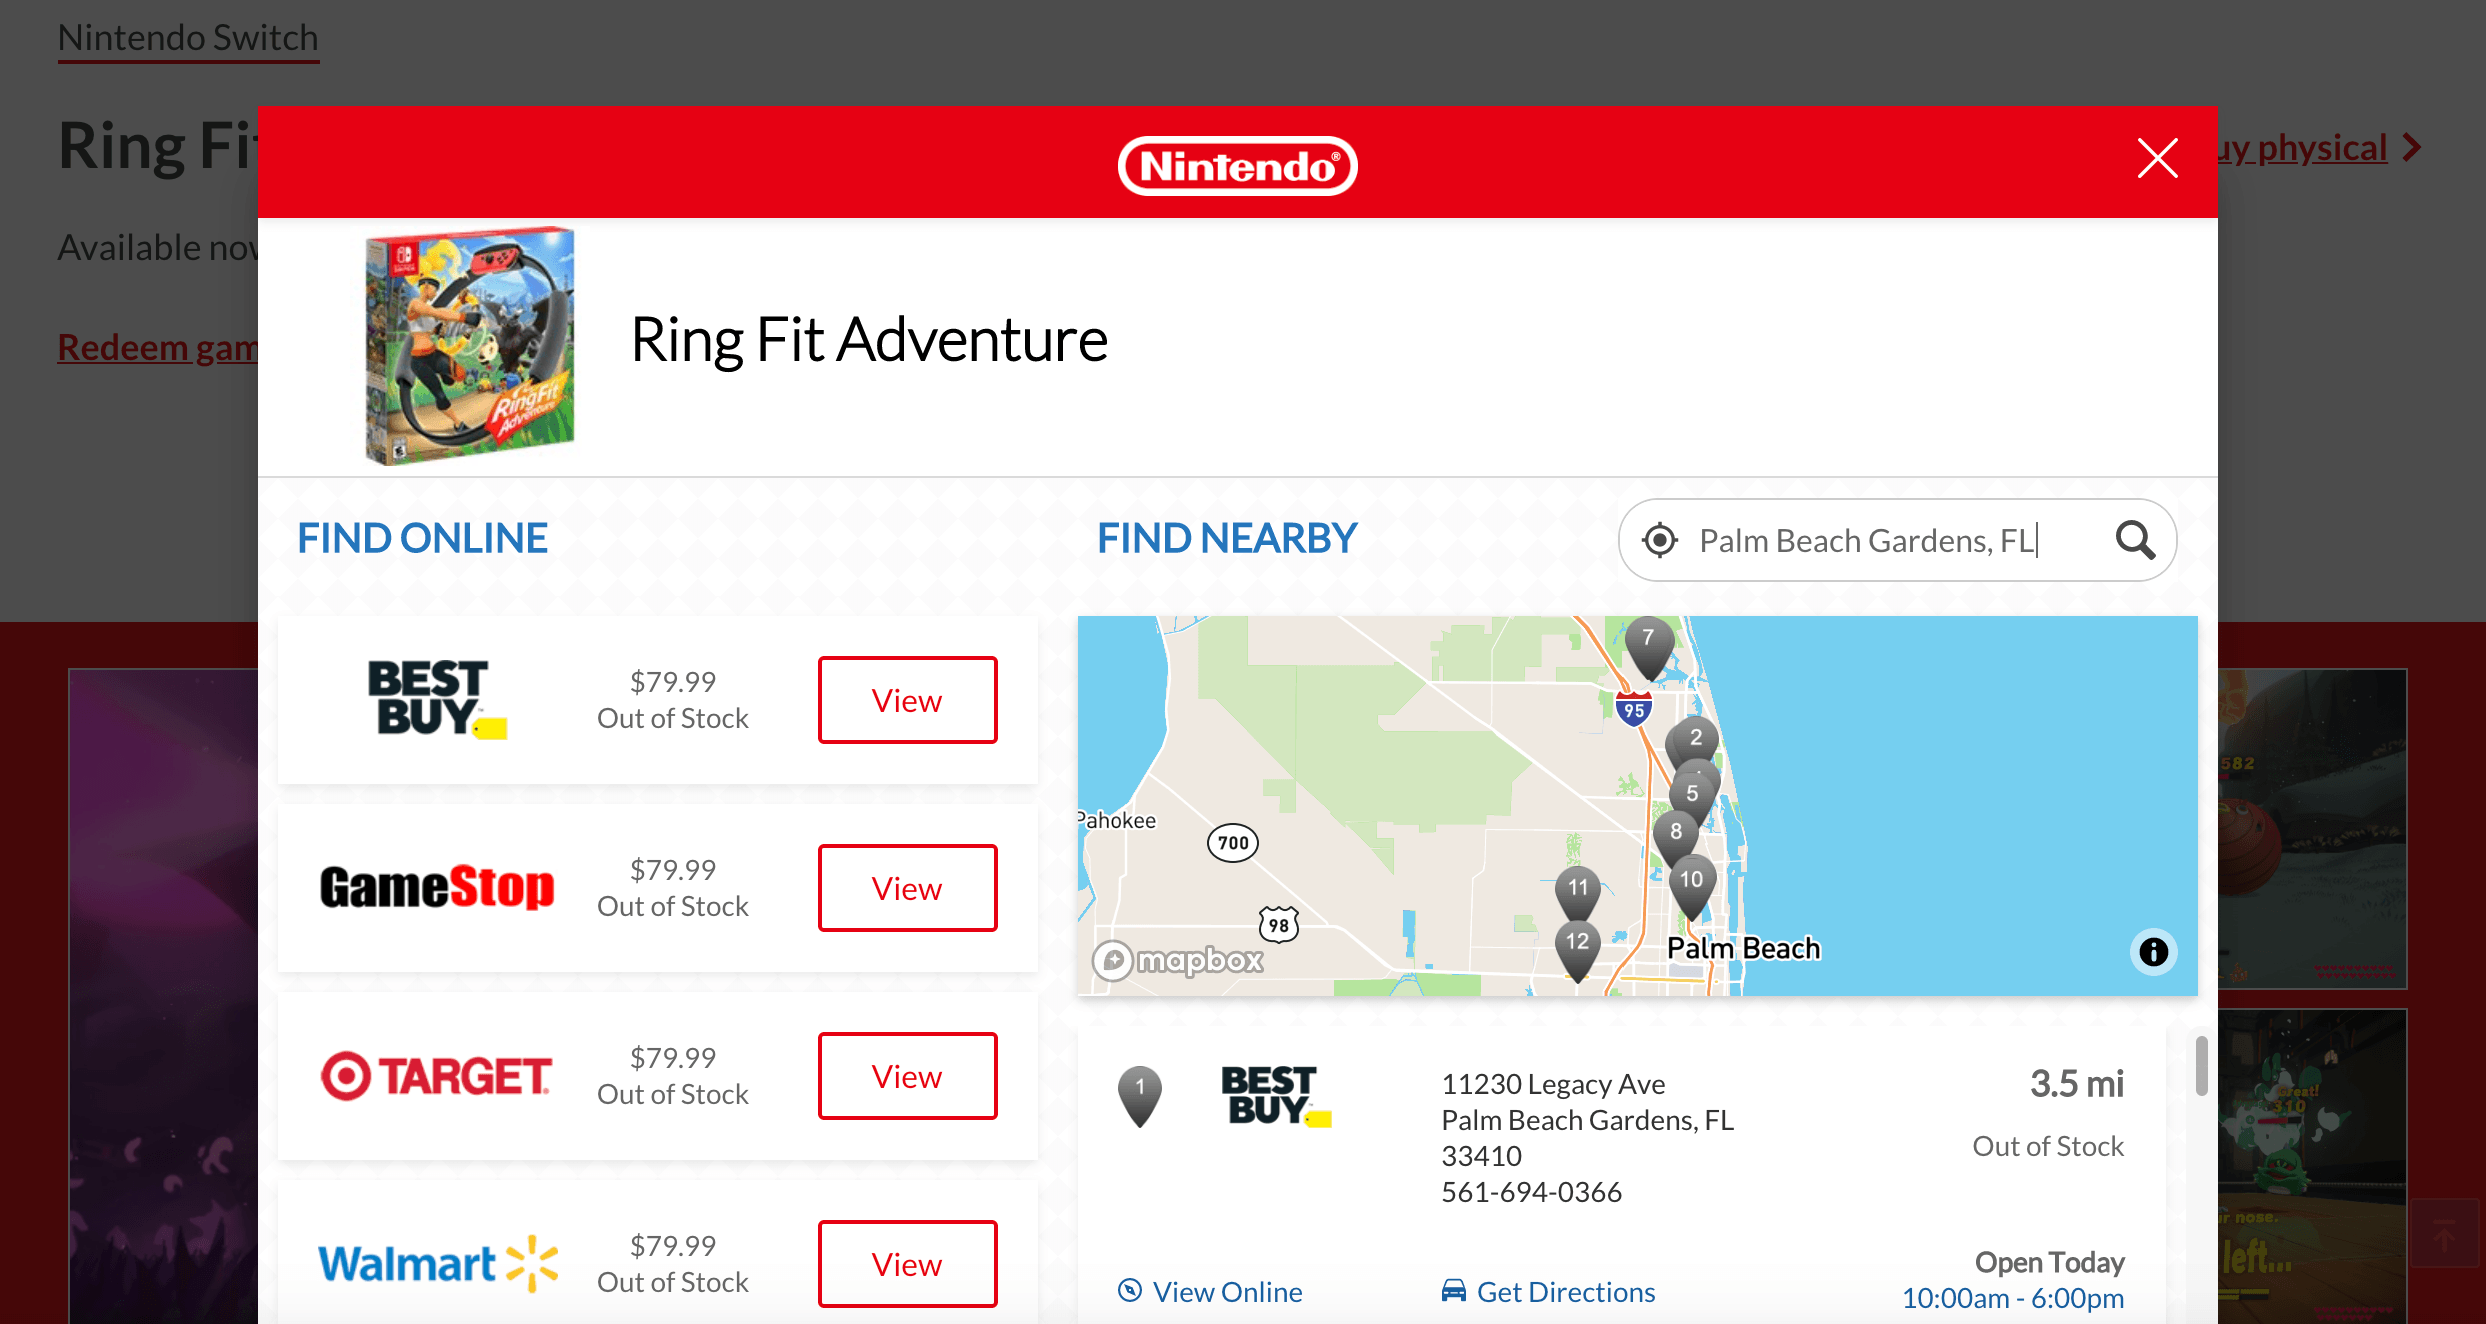 Is there going to be a Ring Fit Adventure 2?